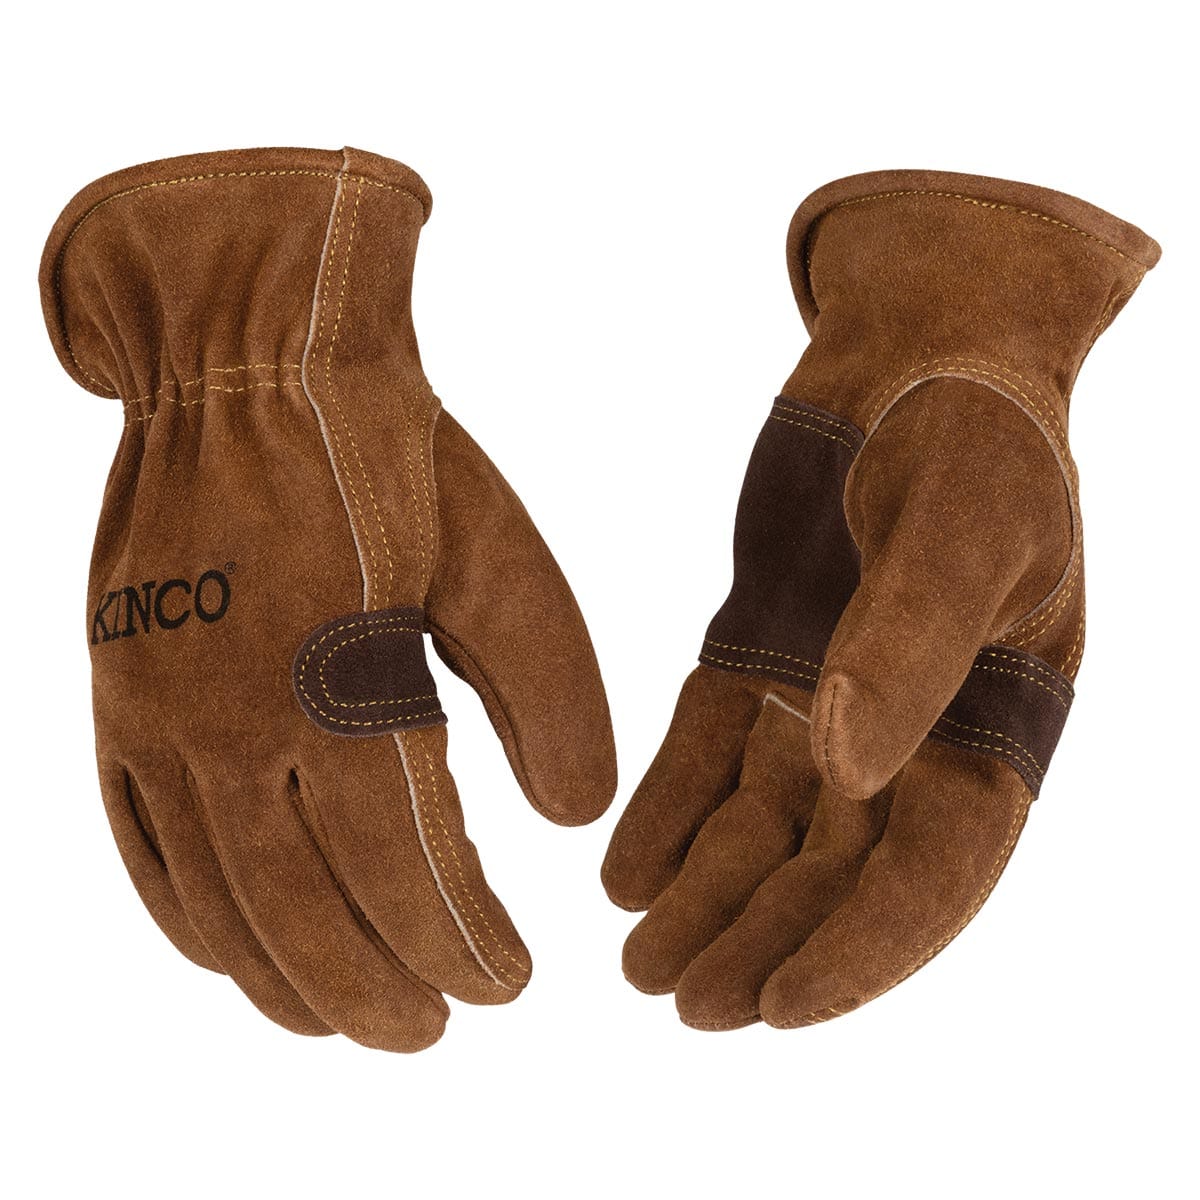 Kinco HydroFlector Water-Resistant Suede Cowhide Driver with Double-Palm